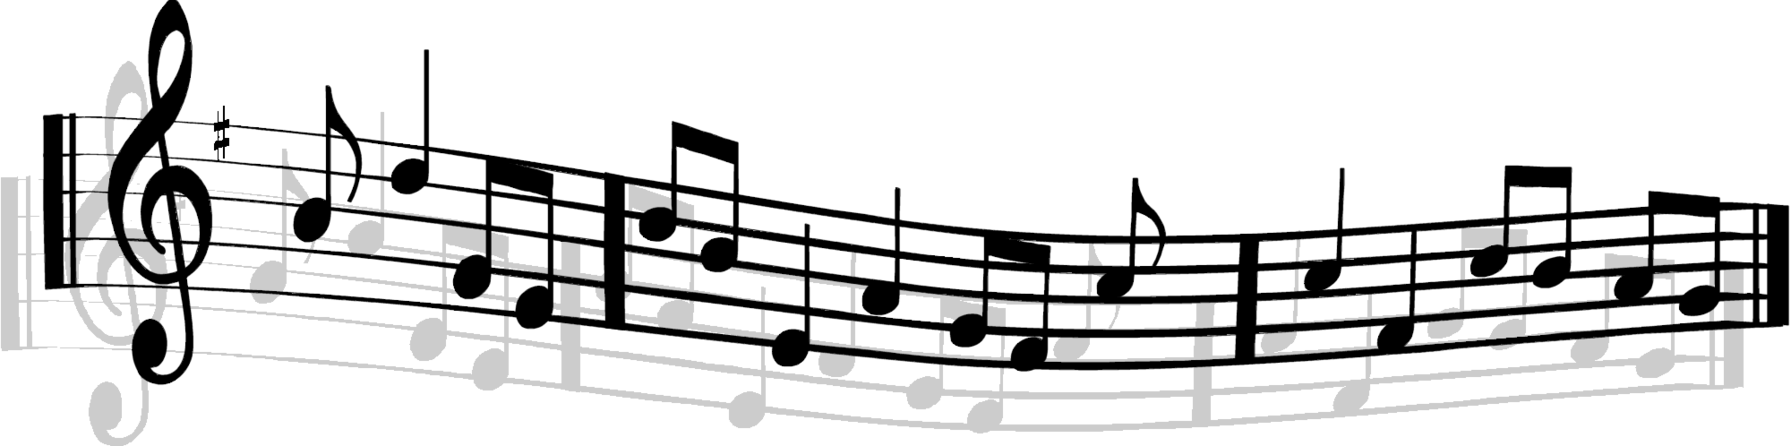 Music Staff With Notes Clipart